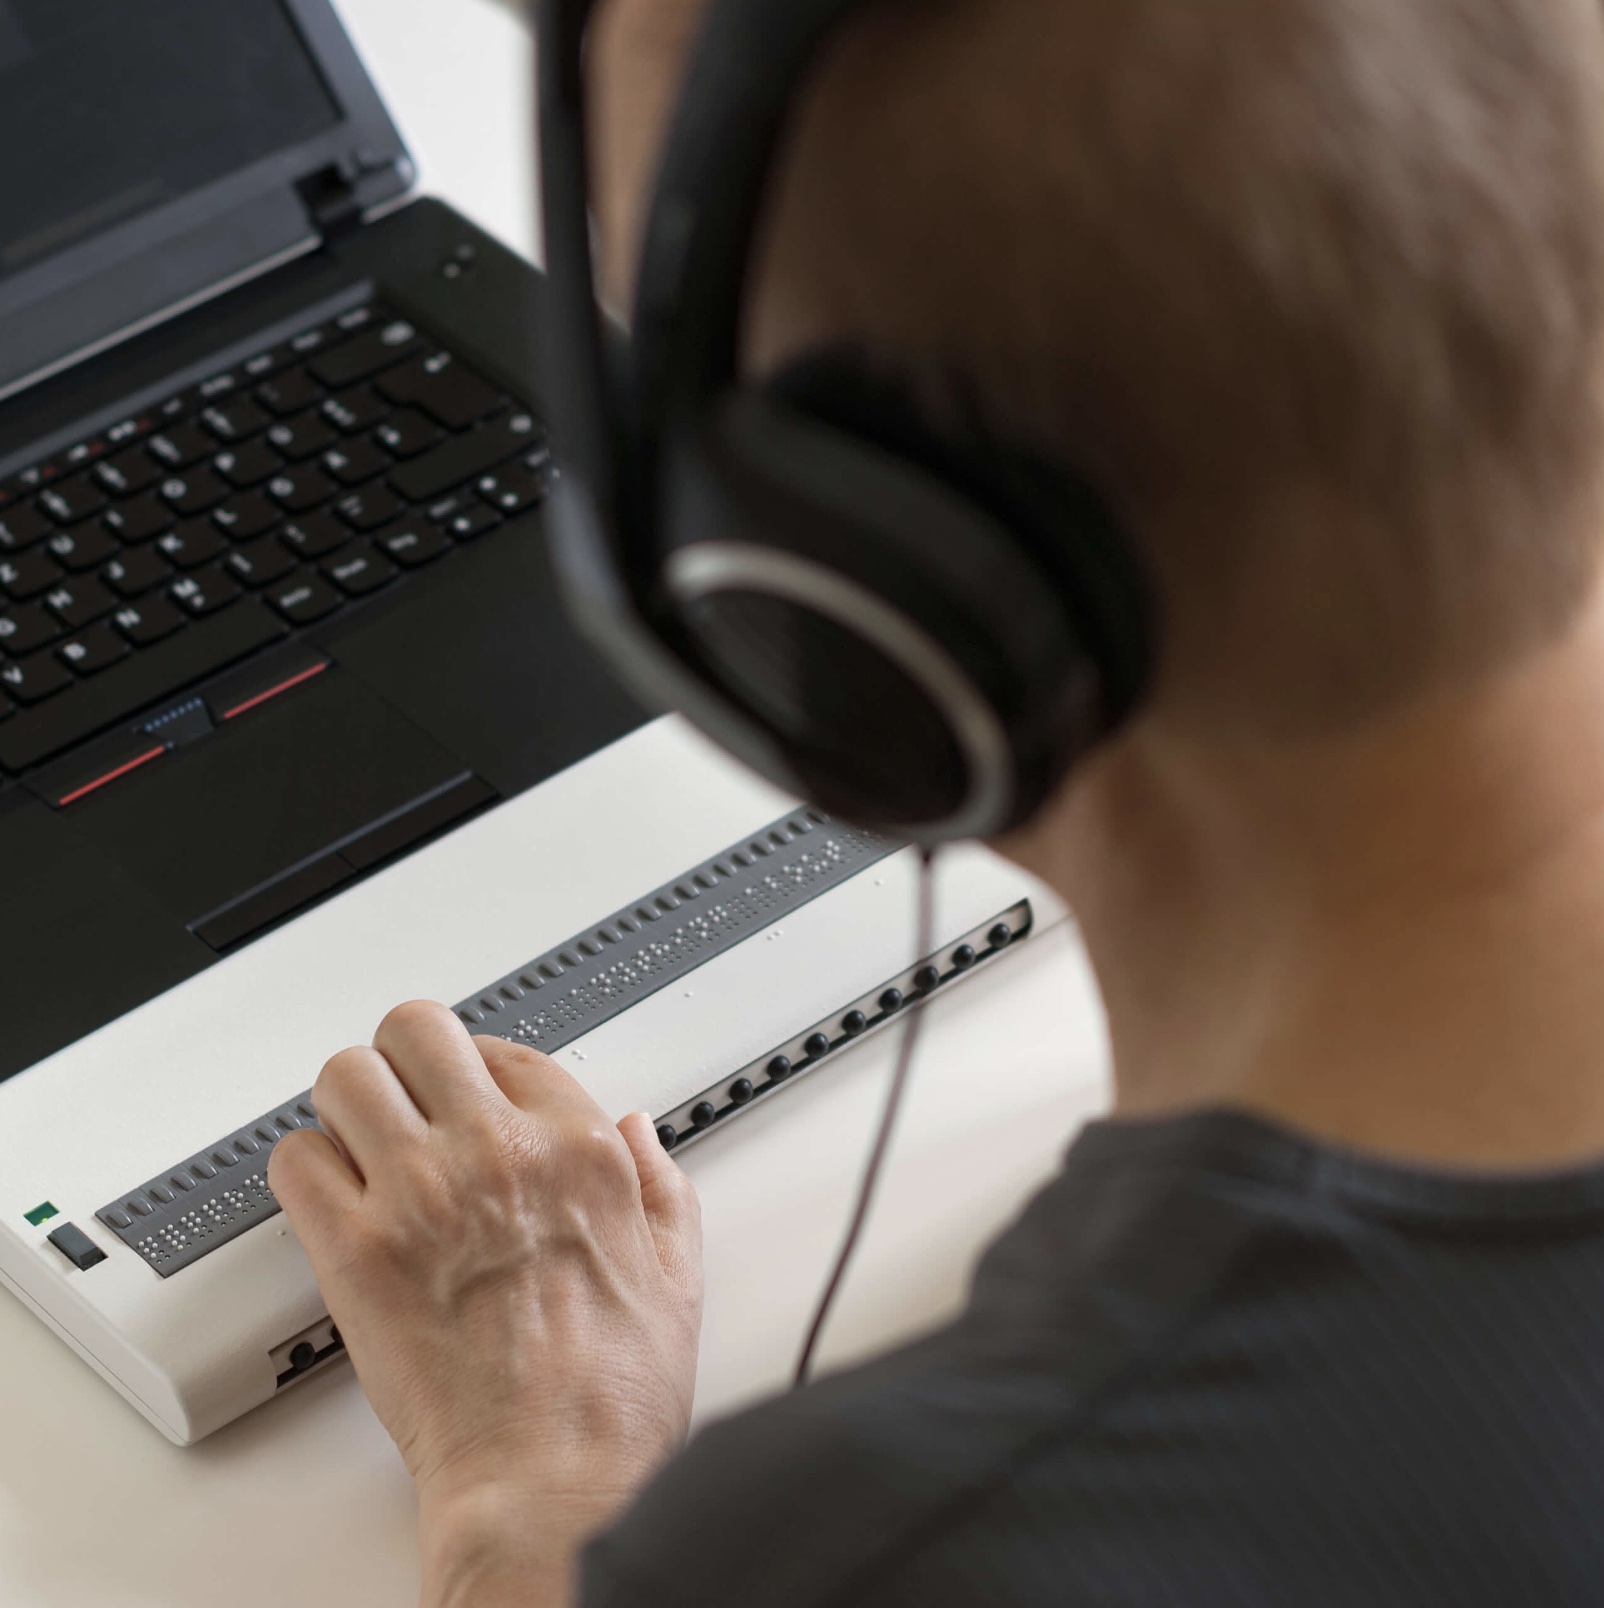 A refreshable Braille display next to a laptop being used by a person wearing headphones